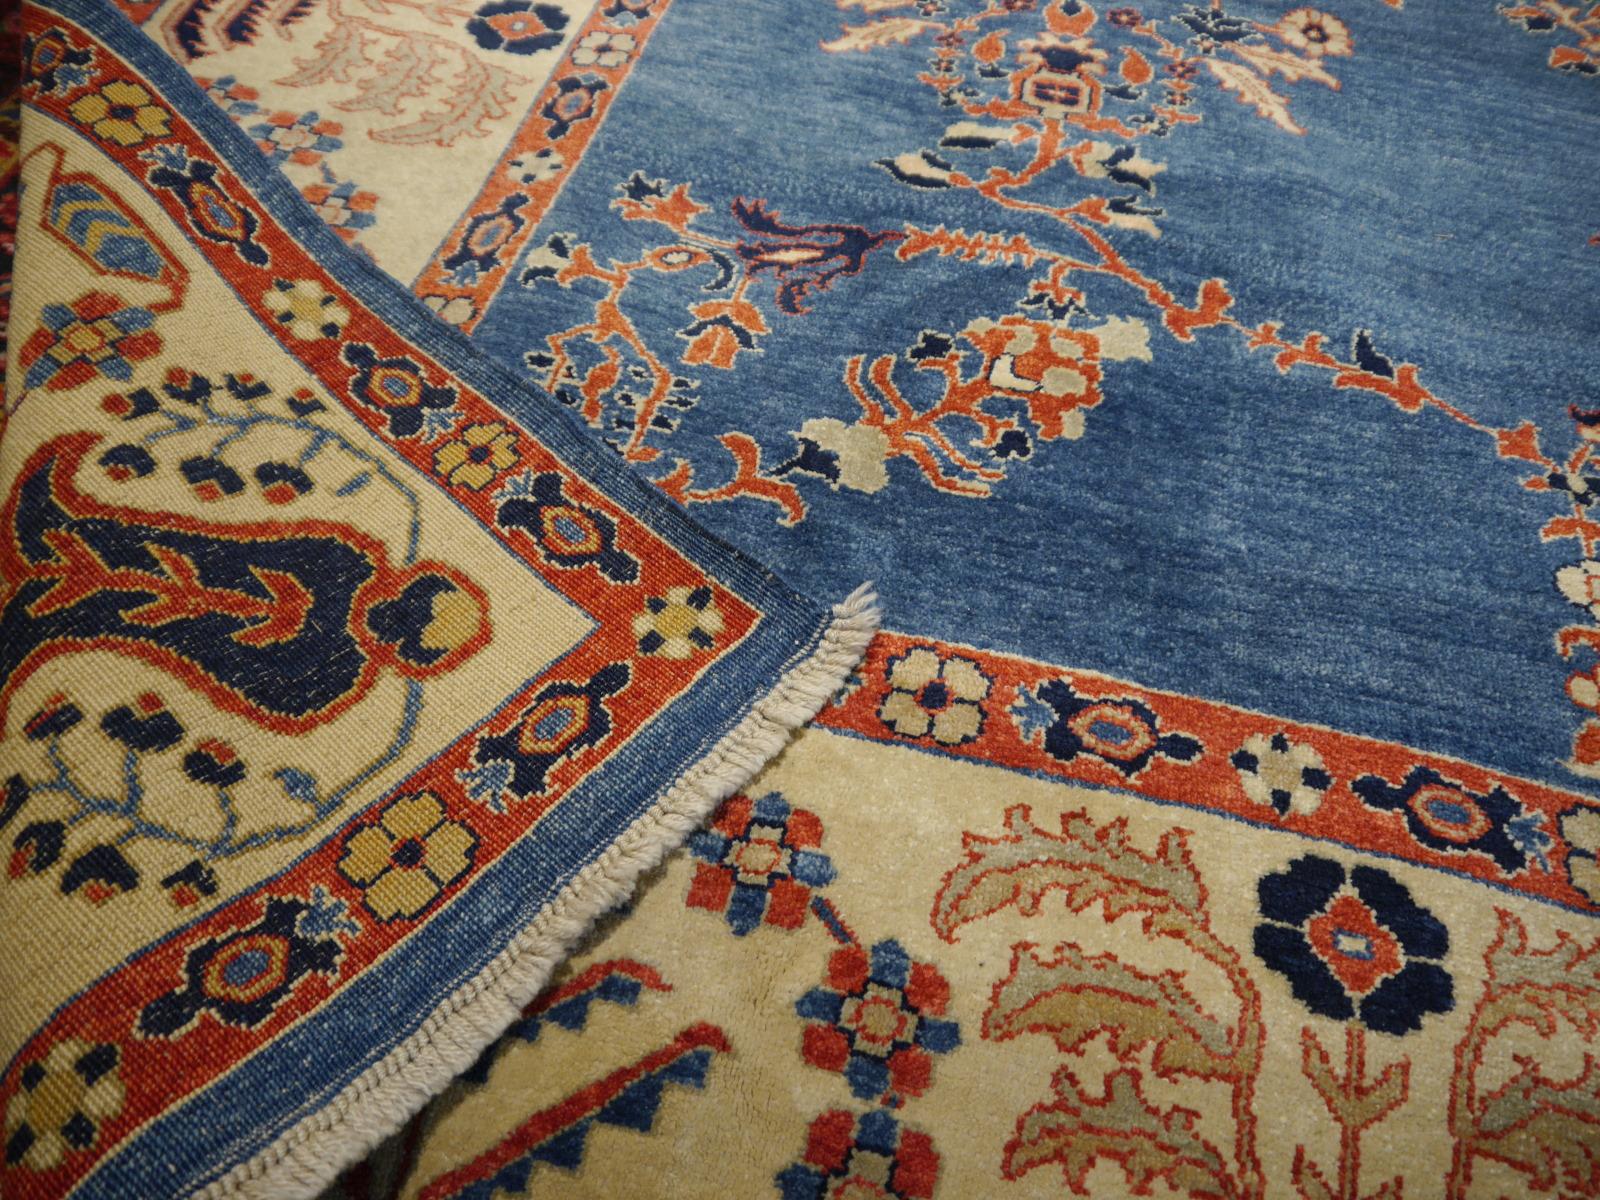 Azeri rug from Turkey with medaillon

Full pile hand-knotted Turkish Azeri rug with blue field and beige border.

Azeri rugs and carpets are mainly made of fine, hand-spun wool, 
This wonderful and stunning example comes from the eastern Anatolian 